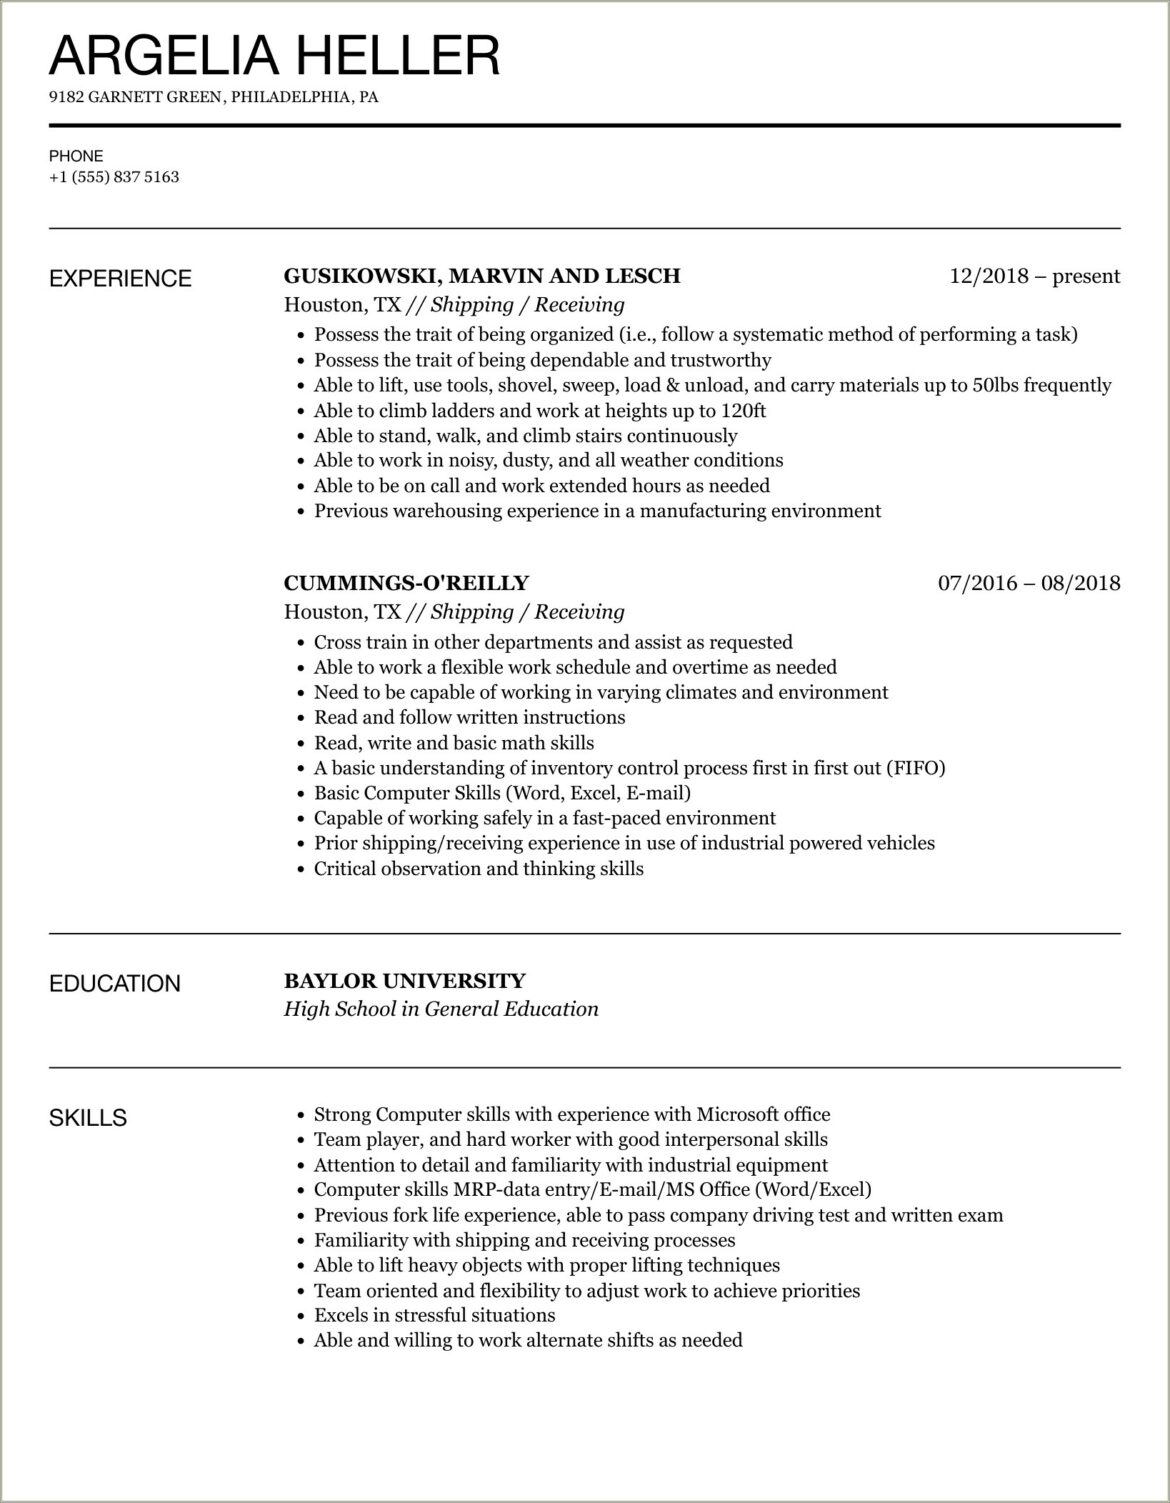 Shipping And Receiving Administrative Job Description For Resume